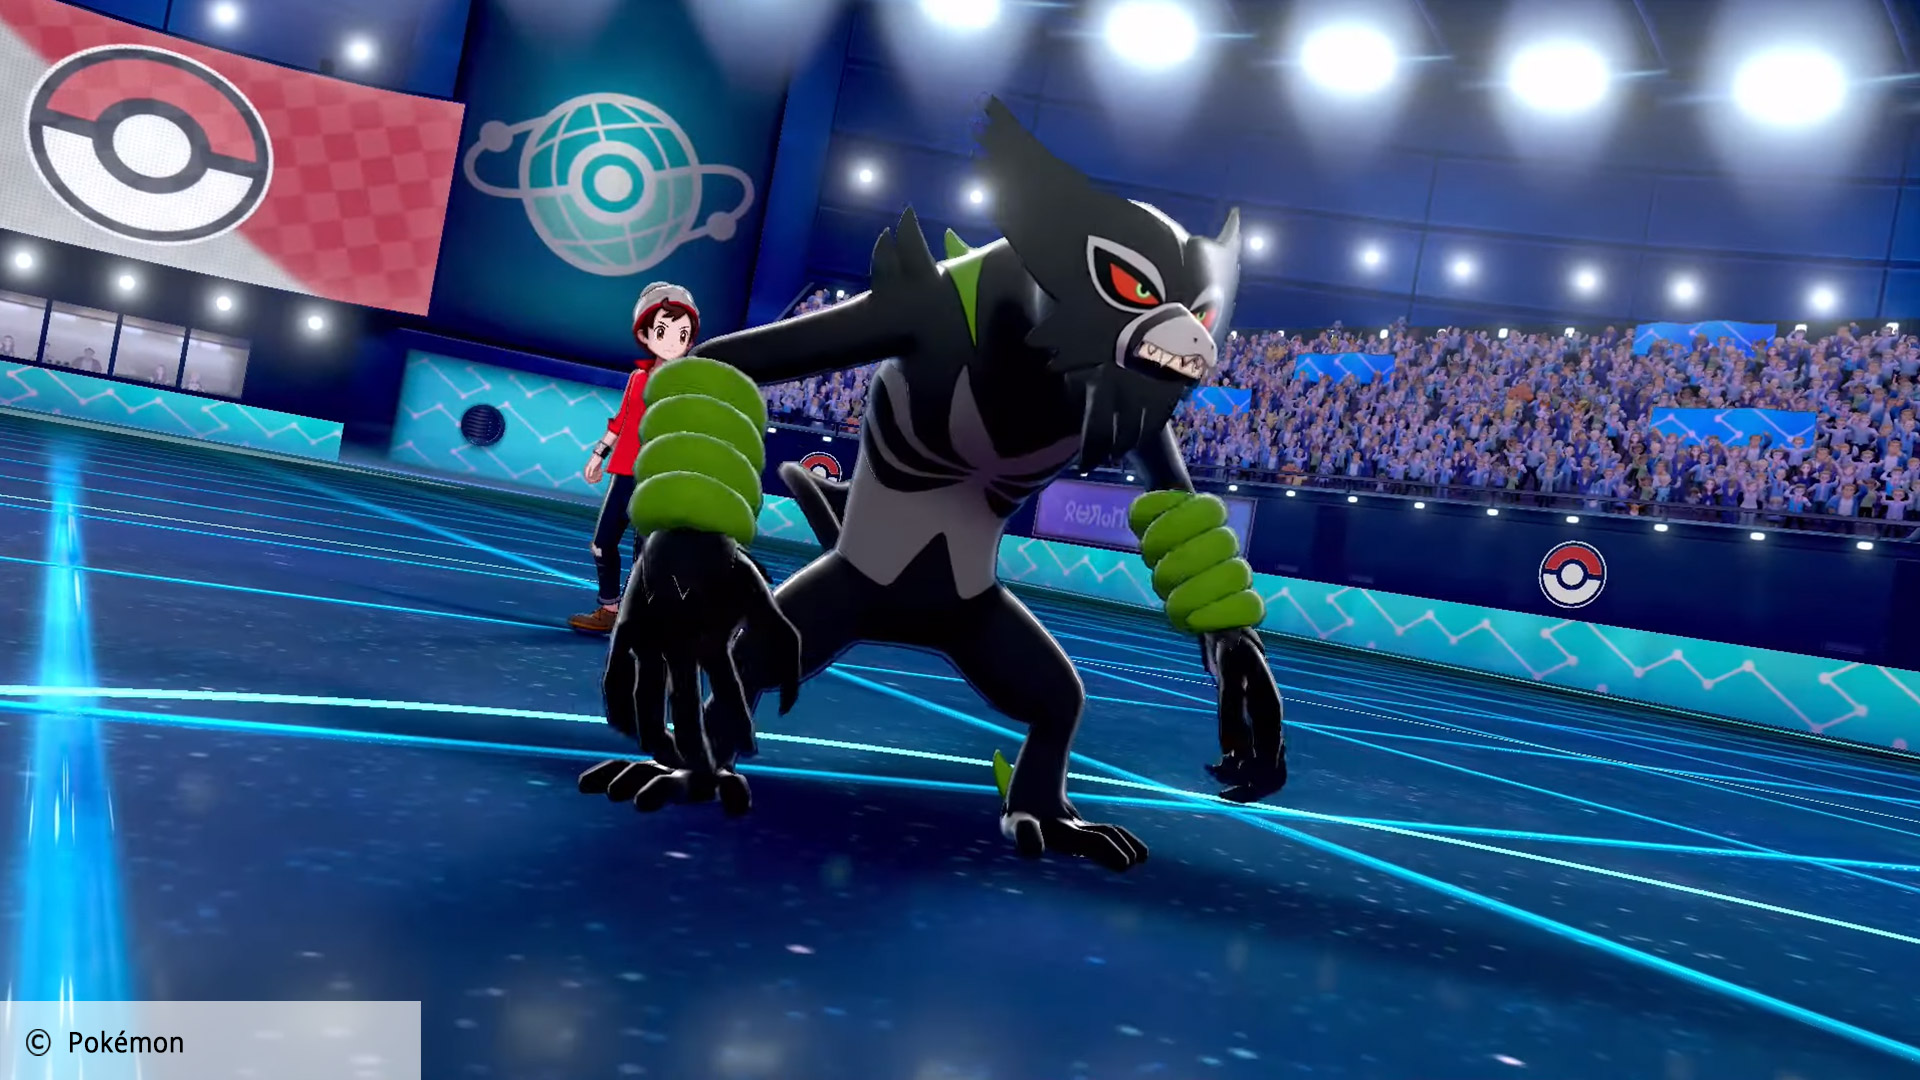 DADA Form Zarude EVENT CONFIRMED Coming To Pokémon Sword And